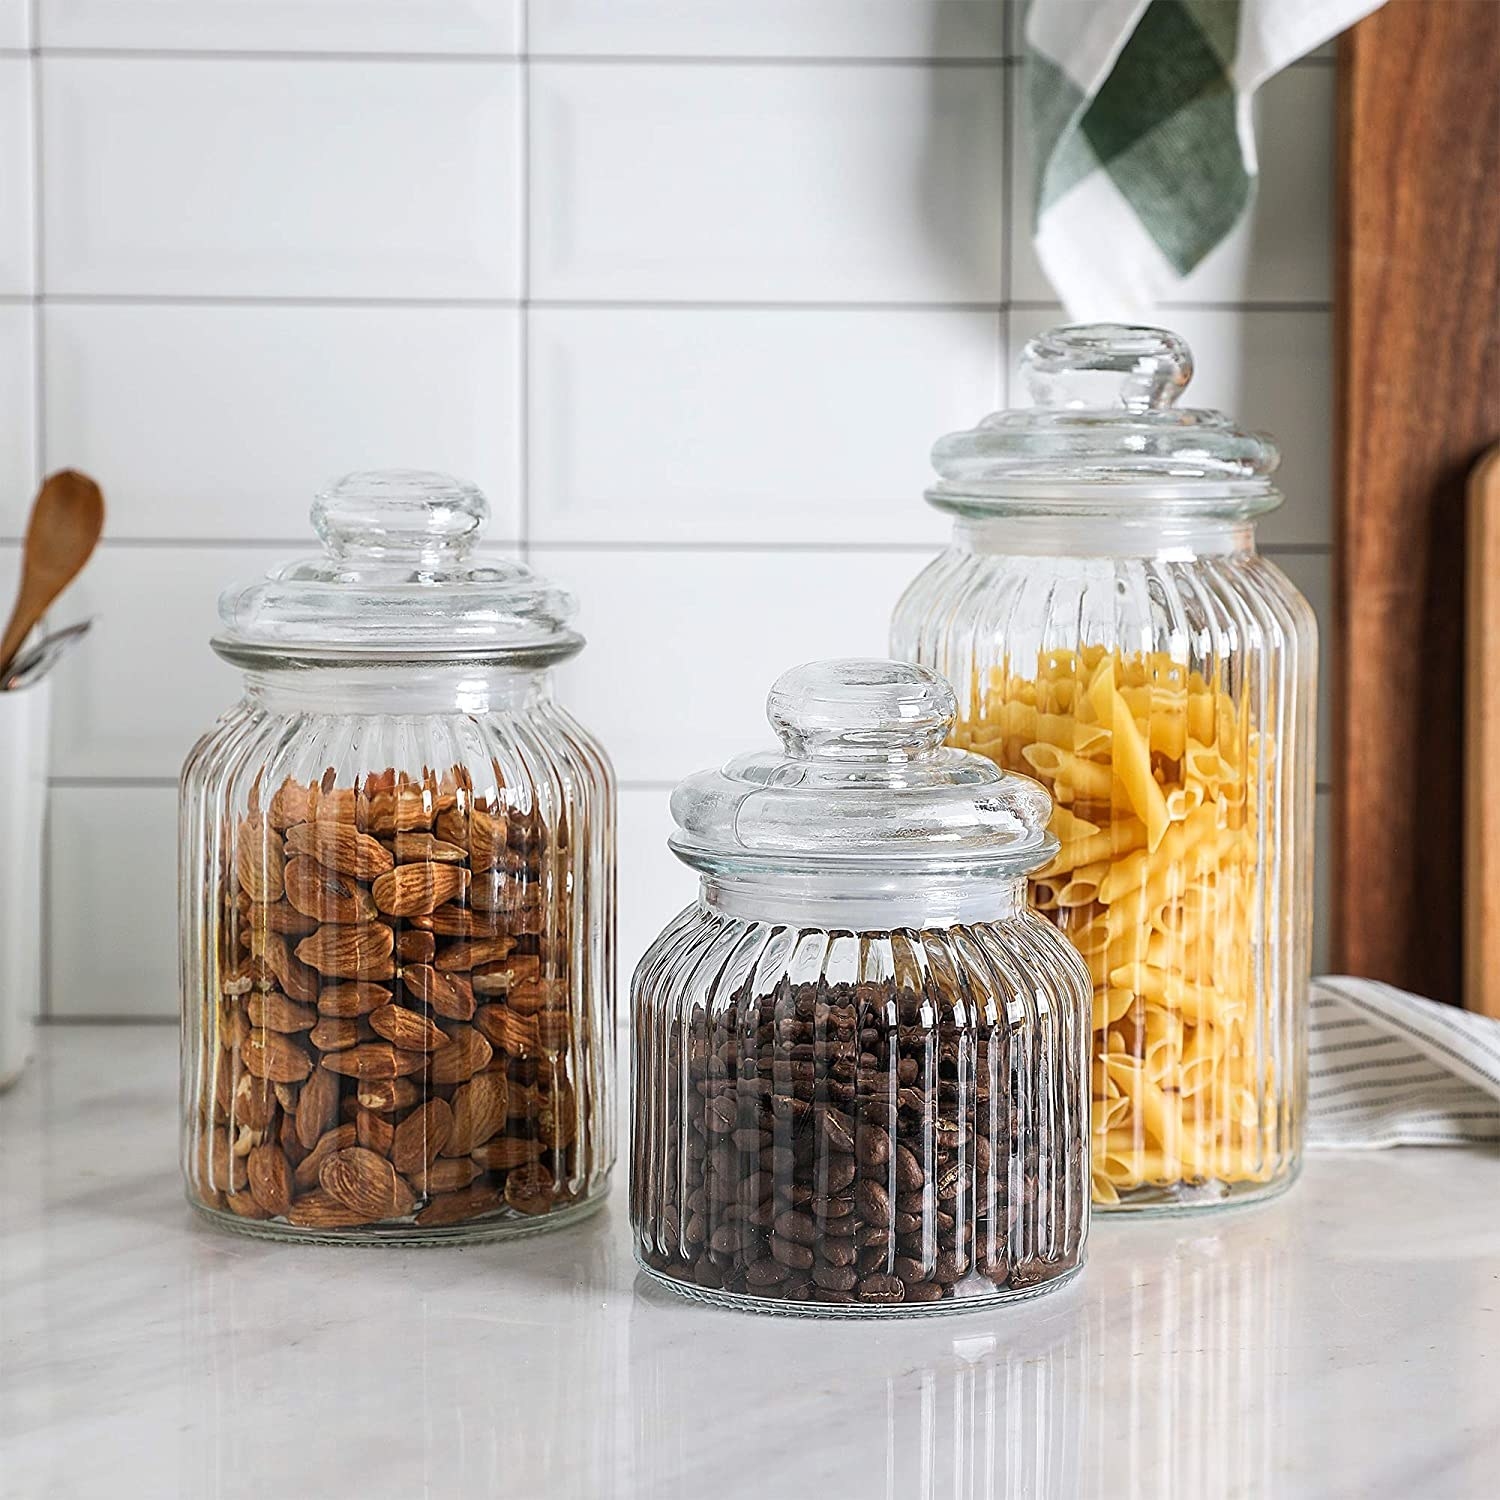 Three jars with nuts, coffee beans, and pasta in them